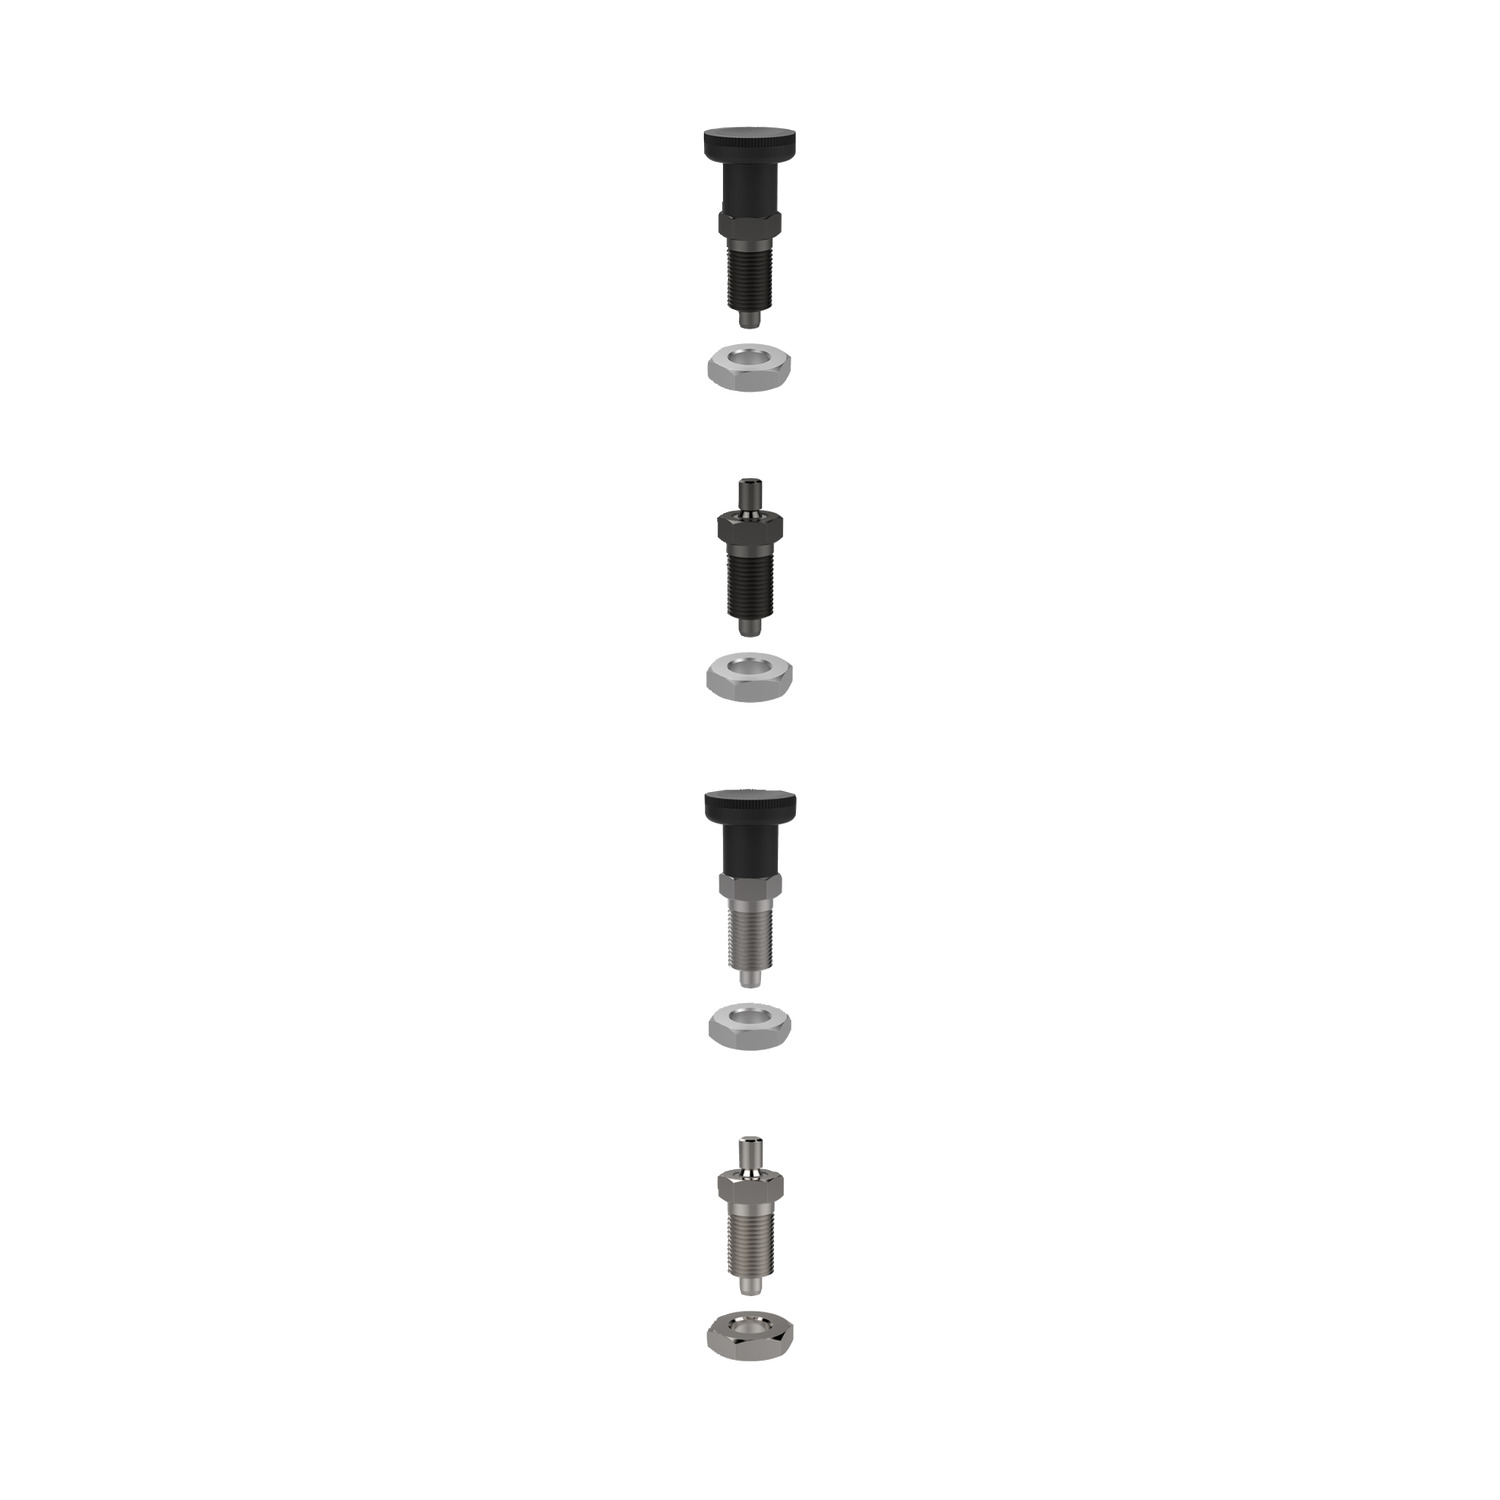 Index Plungers - Pull Grip This range hosts a index plunger without a fitted grip which allows the user to mount a customised handle to suit the application requirements.